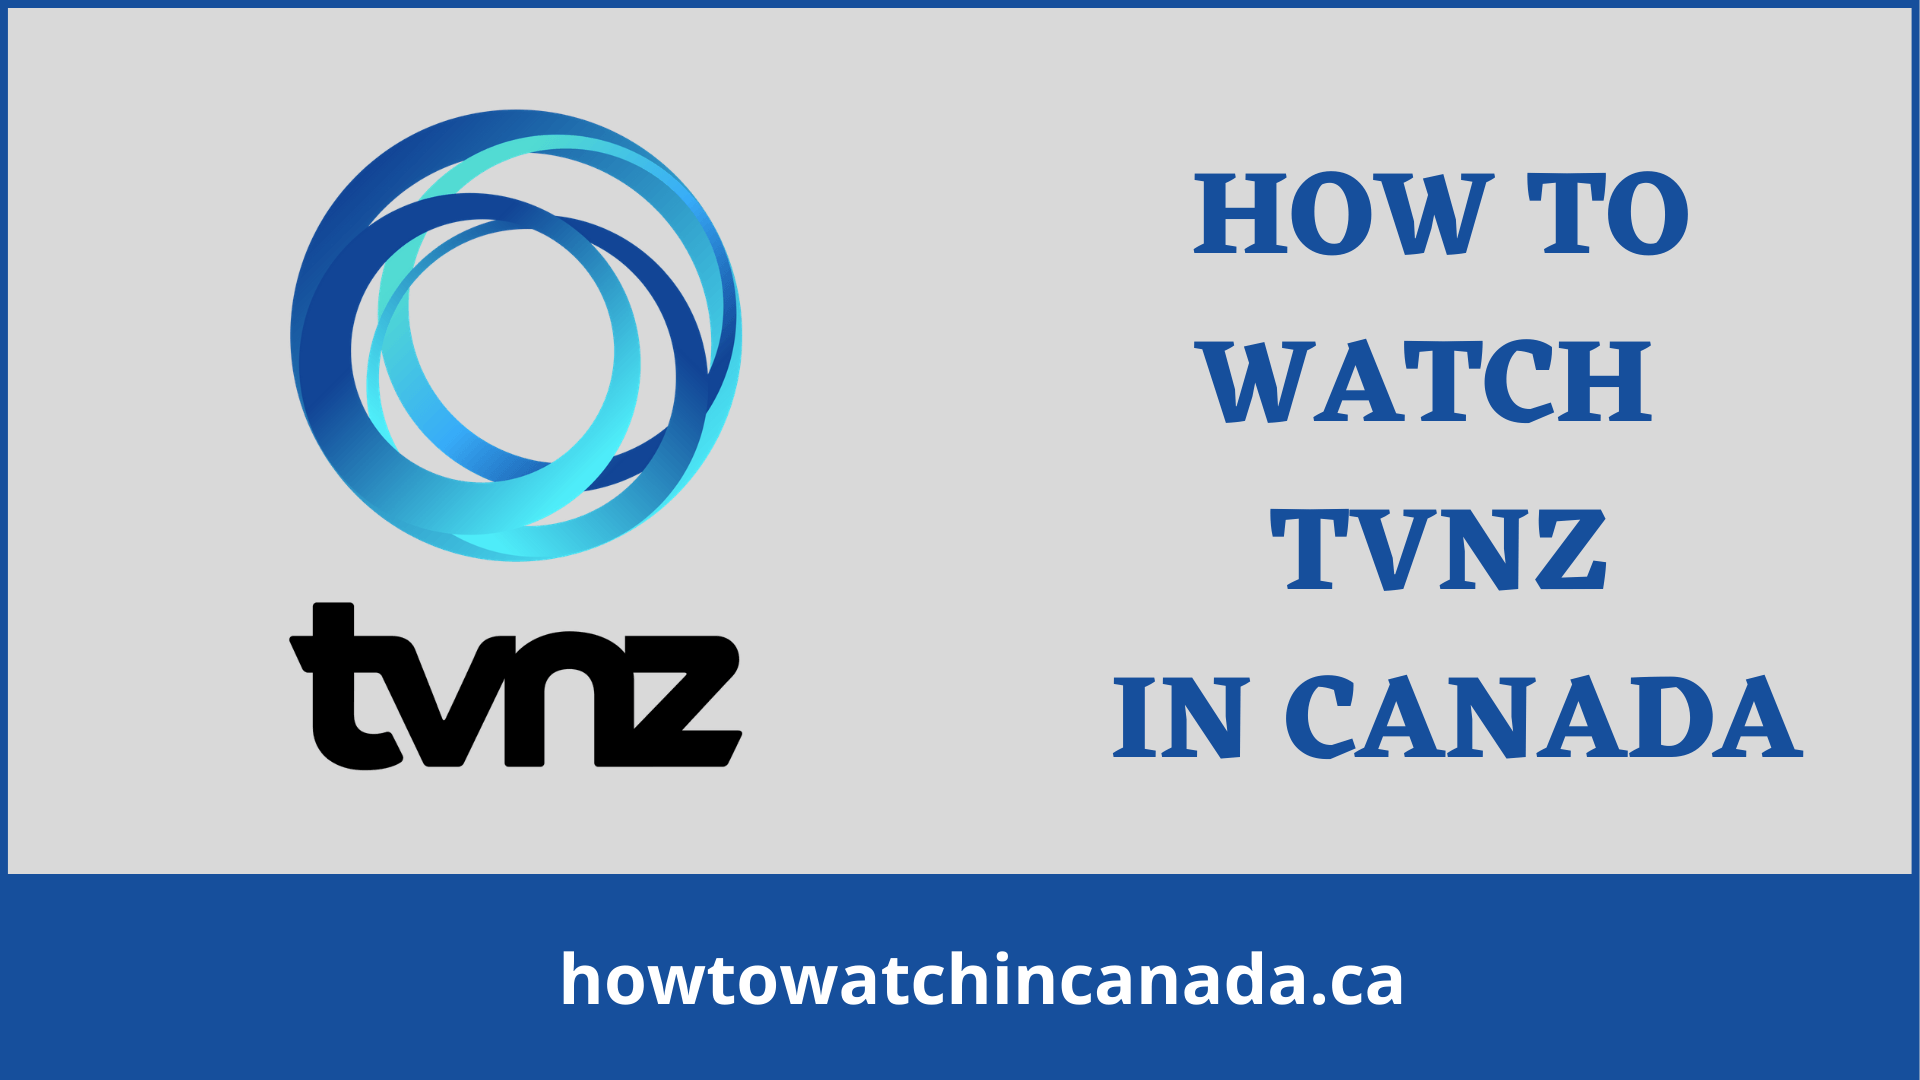 tvnz-feat-how-to-watch-in-canada